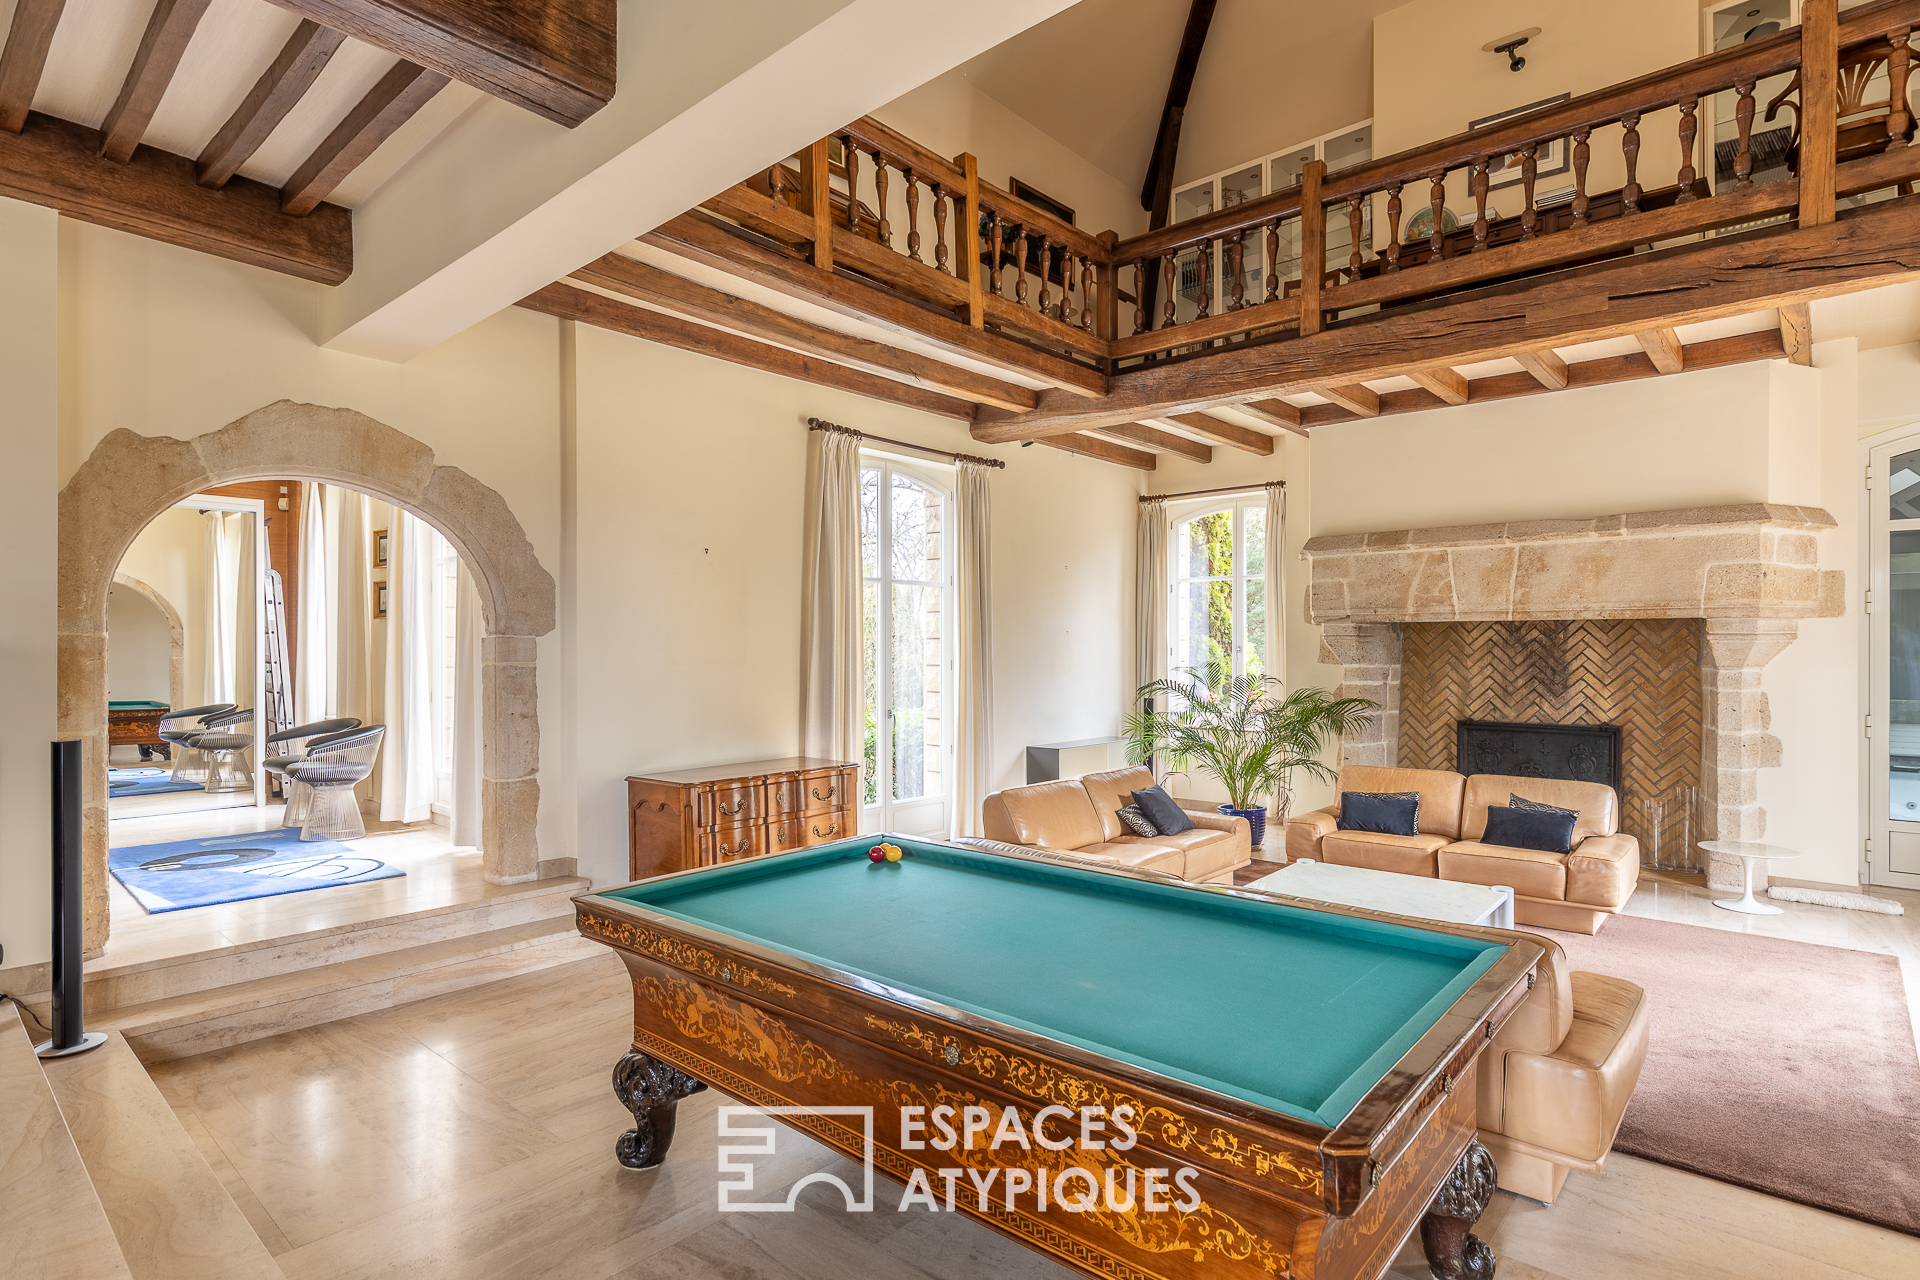 Bourgeois-style house with wooded parklands, indoor swimming pool and tennis court